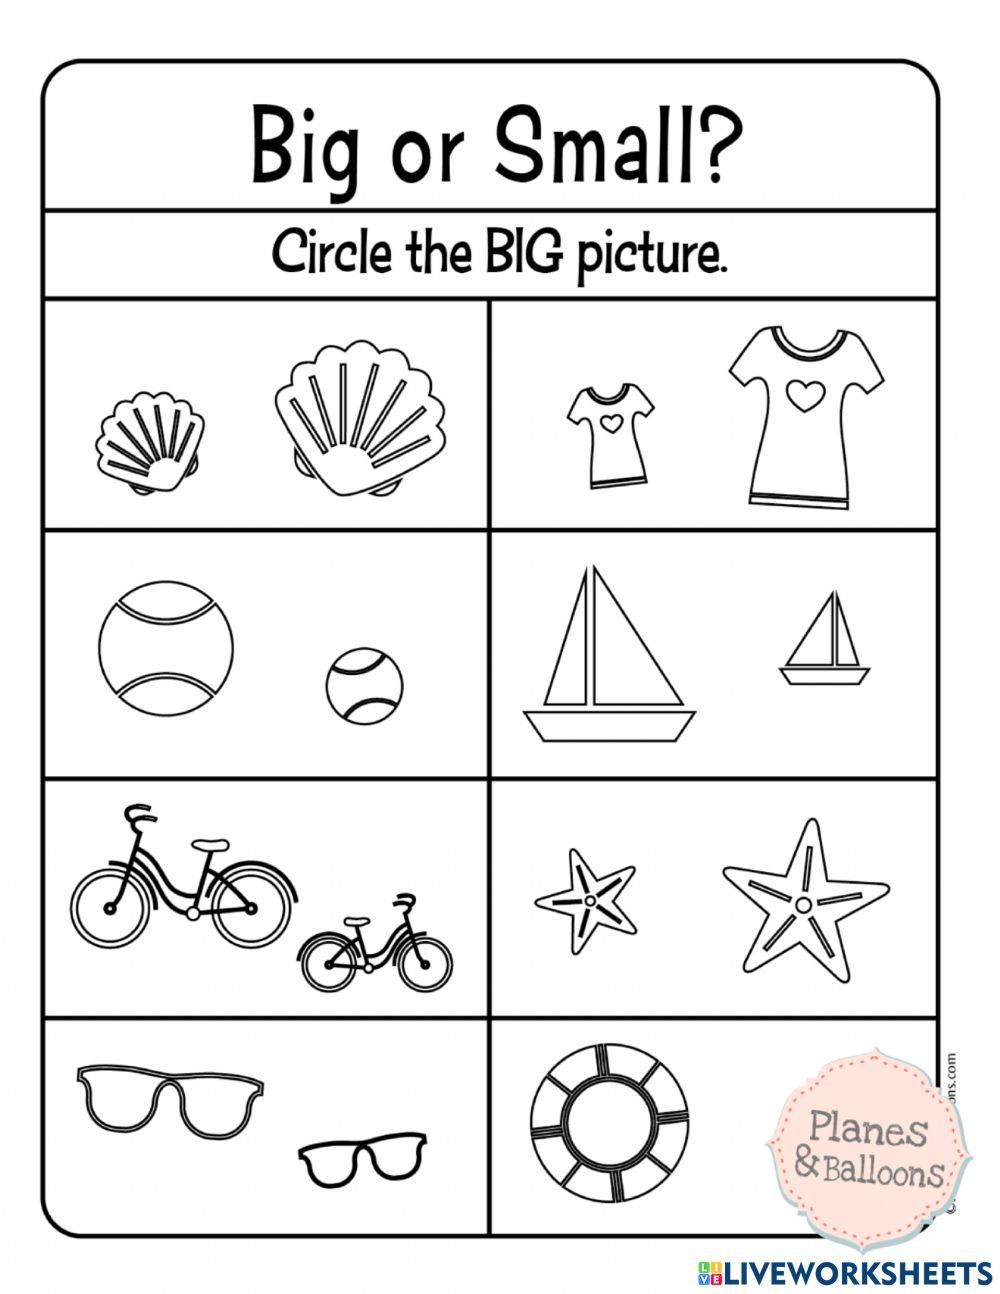 Big and Small Concept with worksheet